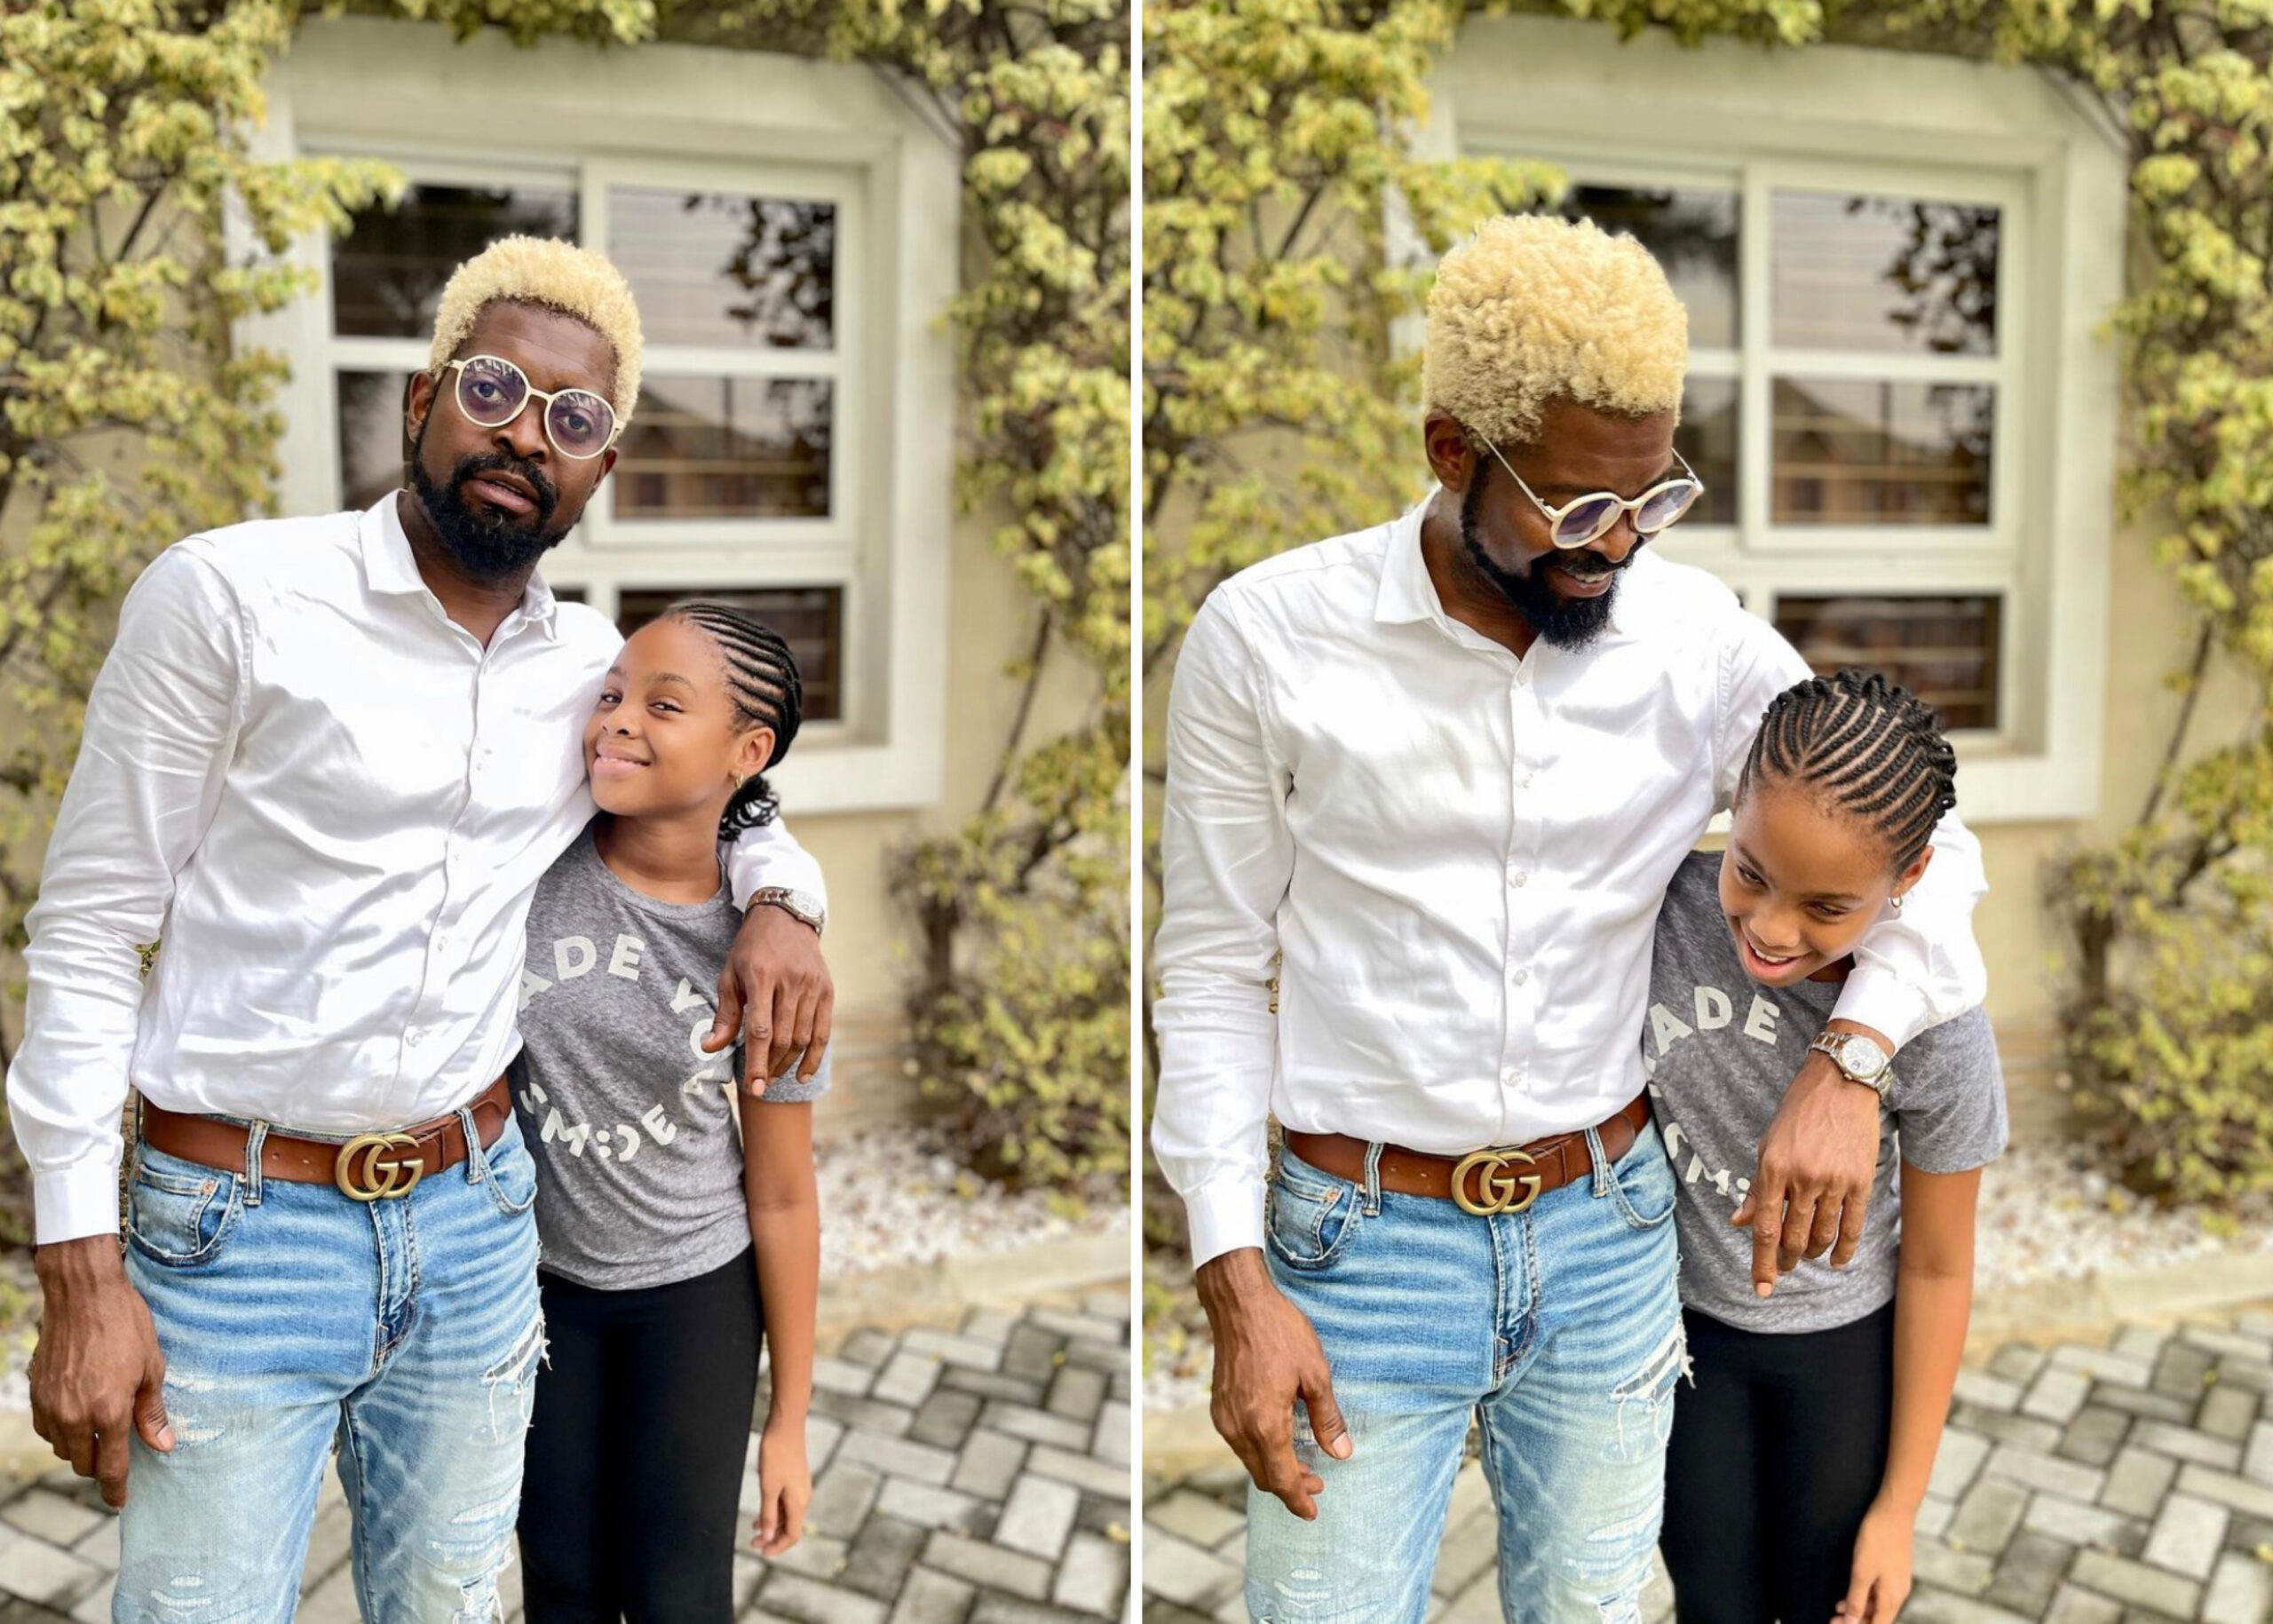 ‘Warn Your Sons’ - Basketmouth Jokingly Tells Parents As Daughter Turns 11